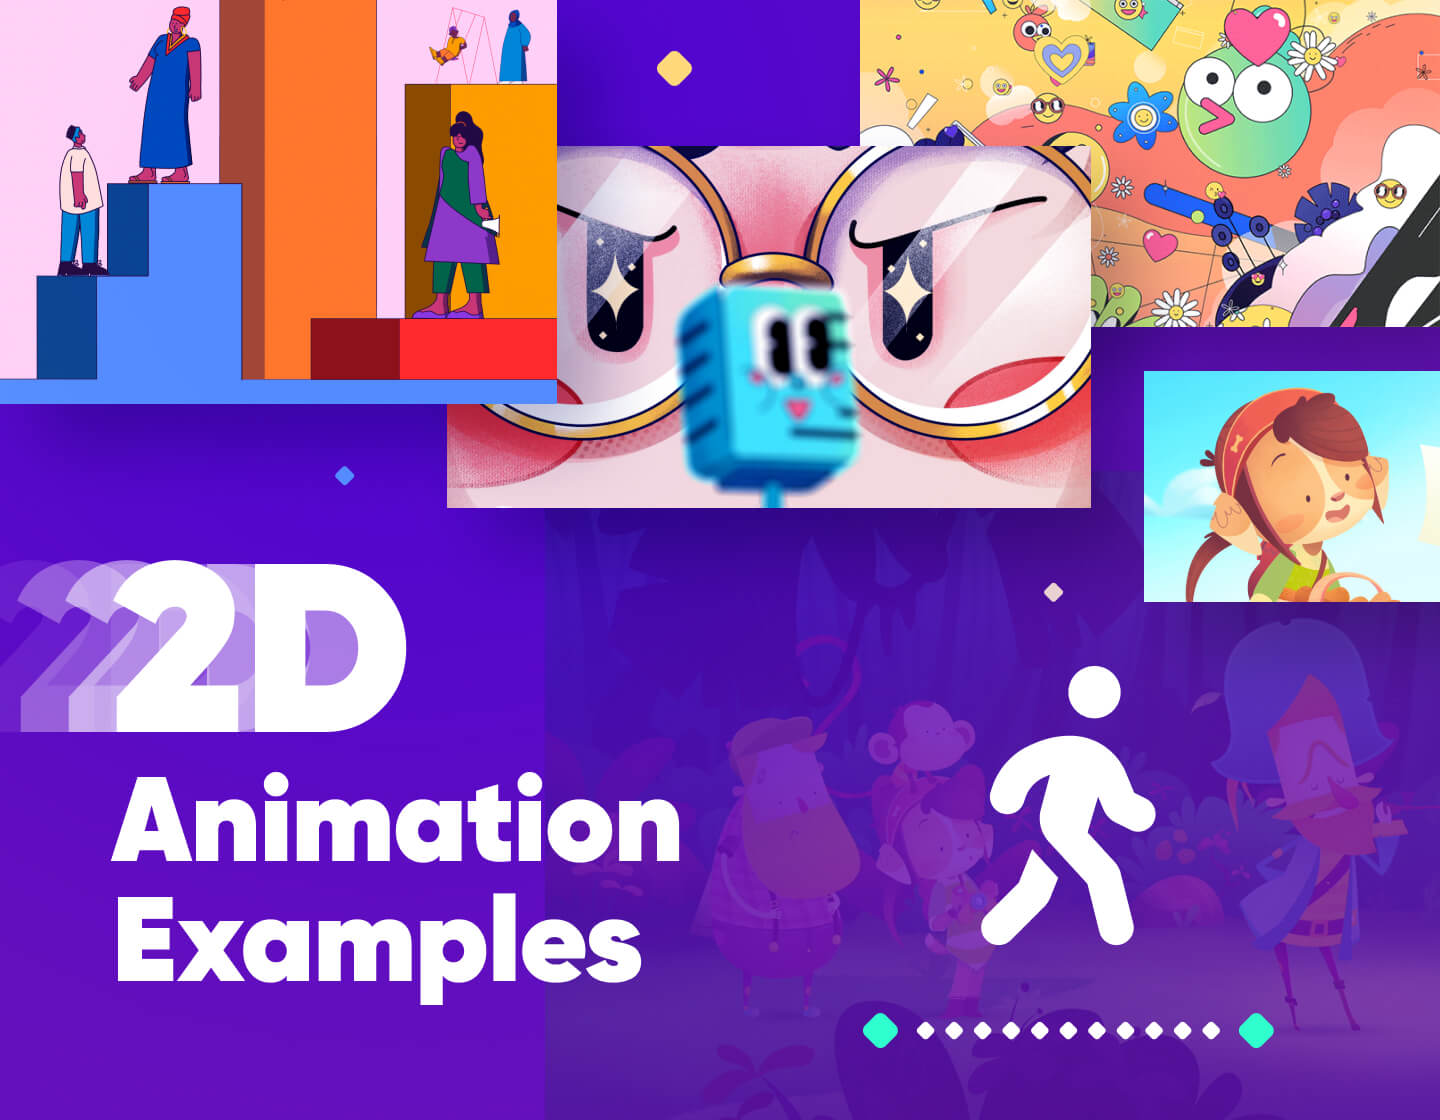 37 Amazing 2D Animation Examples to Fuel your Creativity